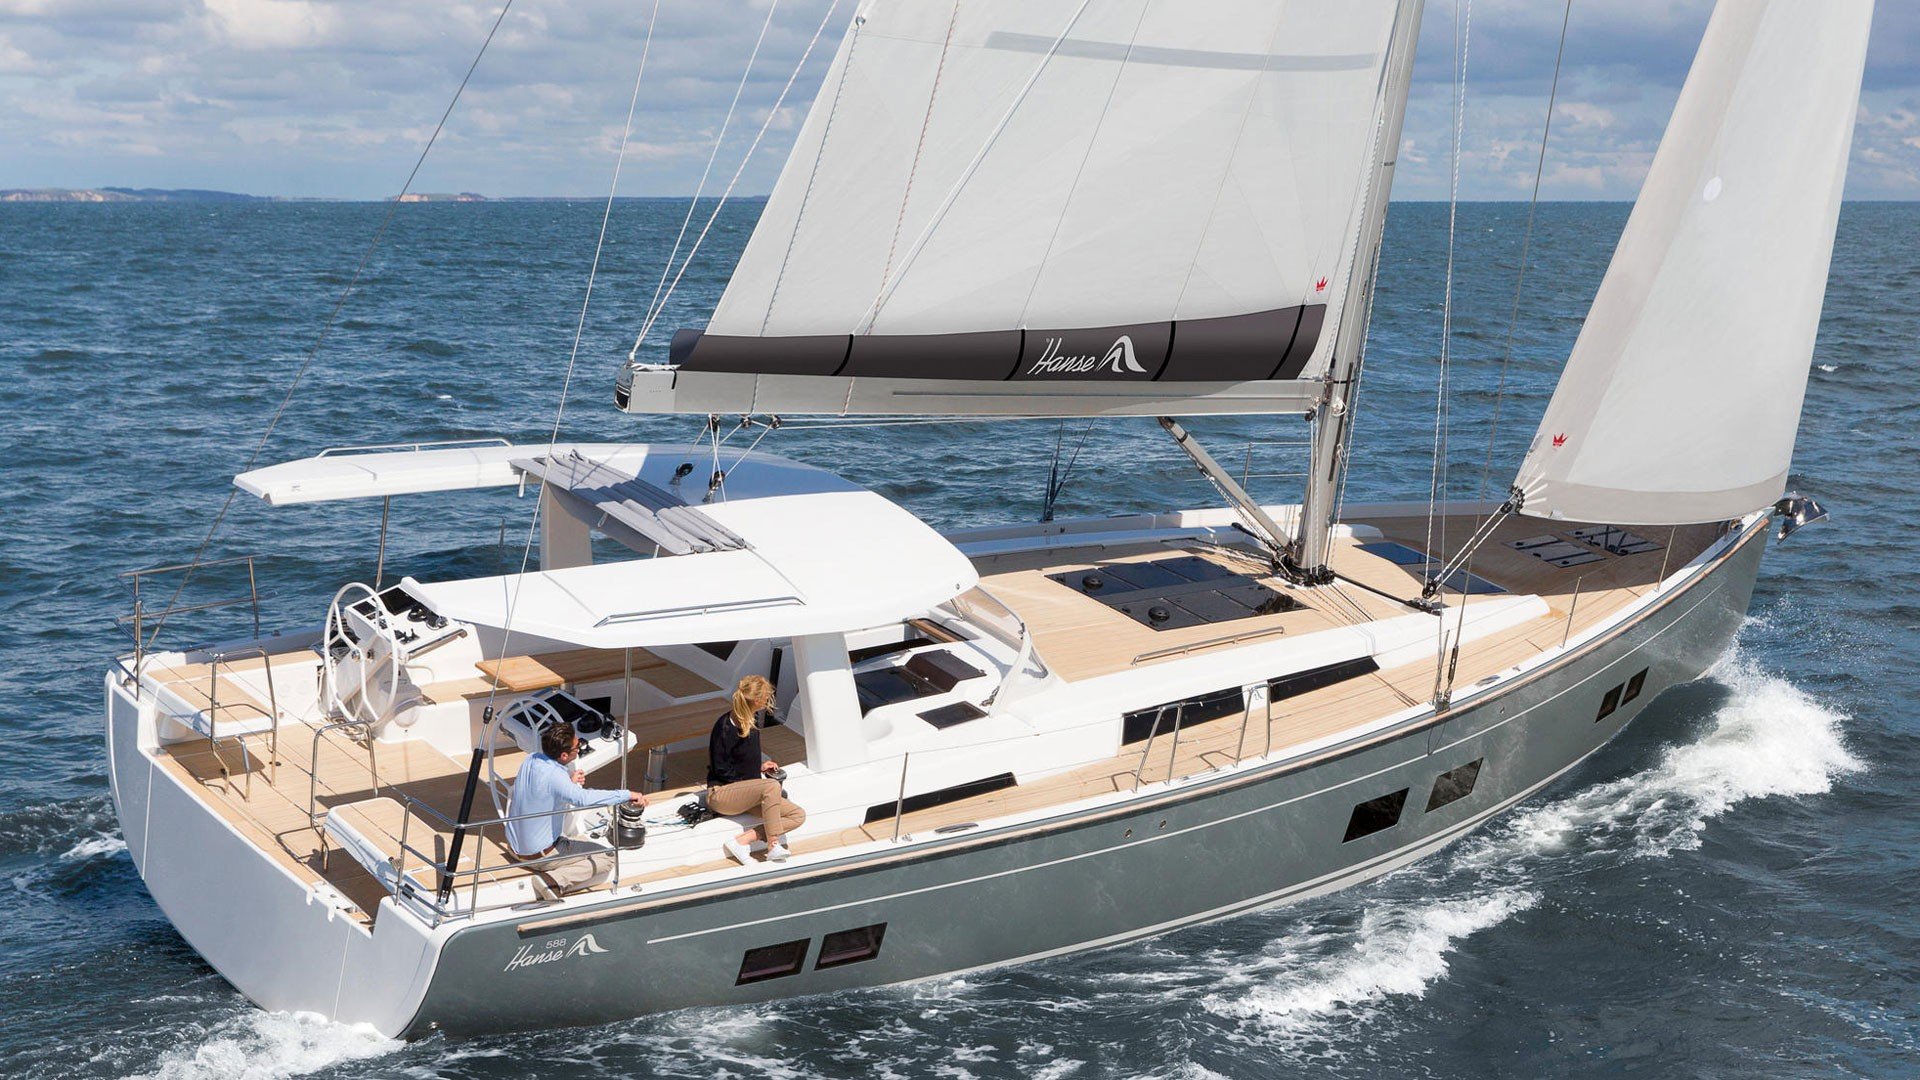 360 VR Virtual Tours of the Hanse 588